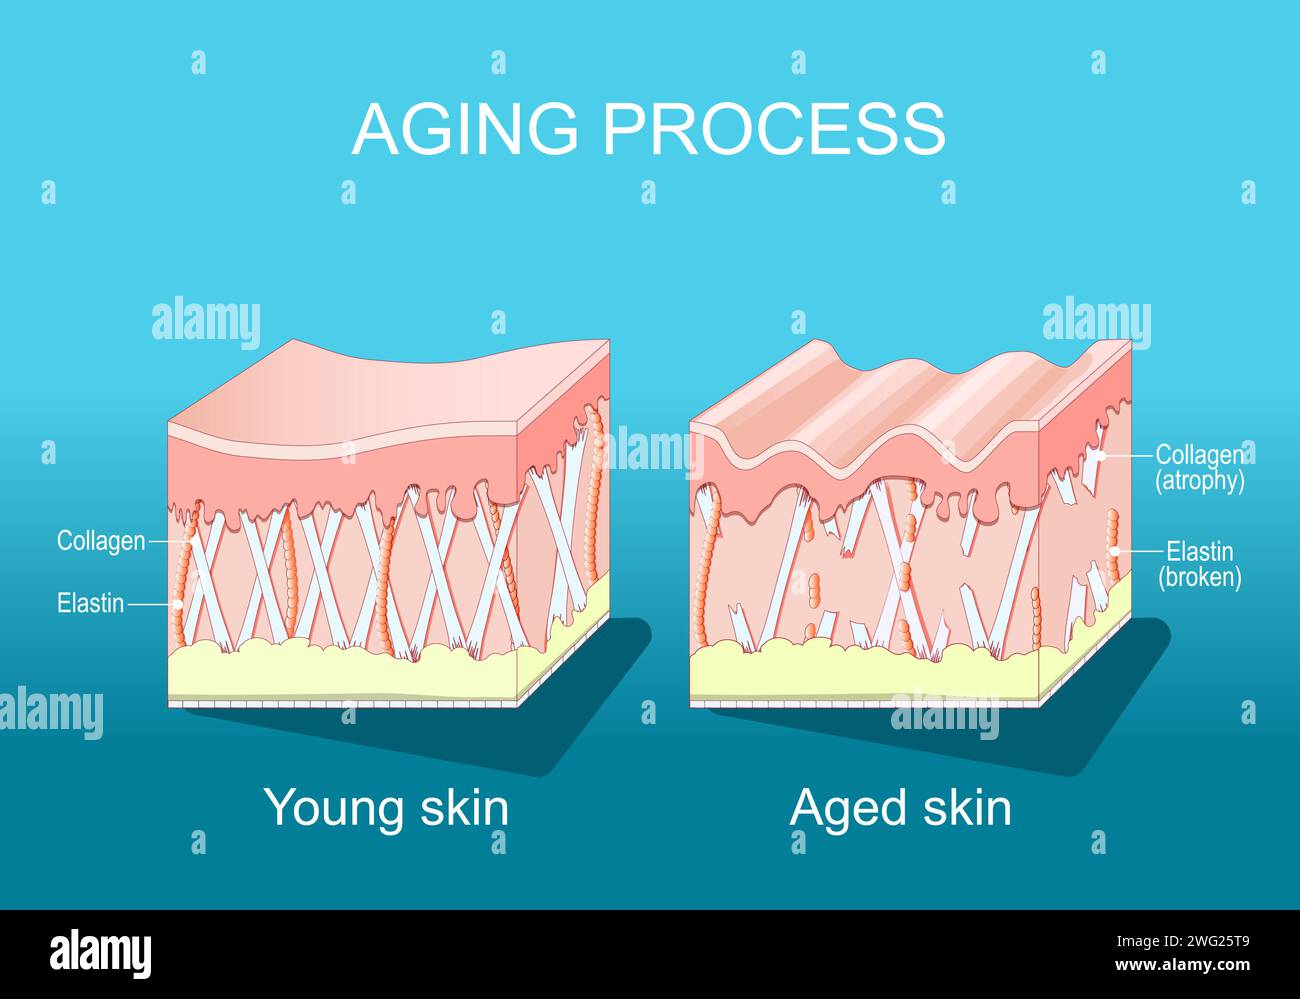 Aging process. comparison of young and aged skin. Collagen, Elastin and fibroblasts in younger and older skin. age-related changes in the skin when Co Stock Vector